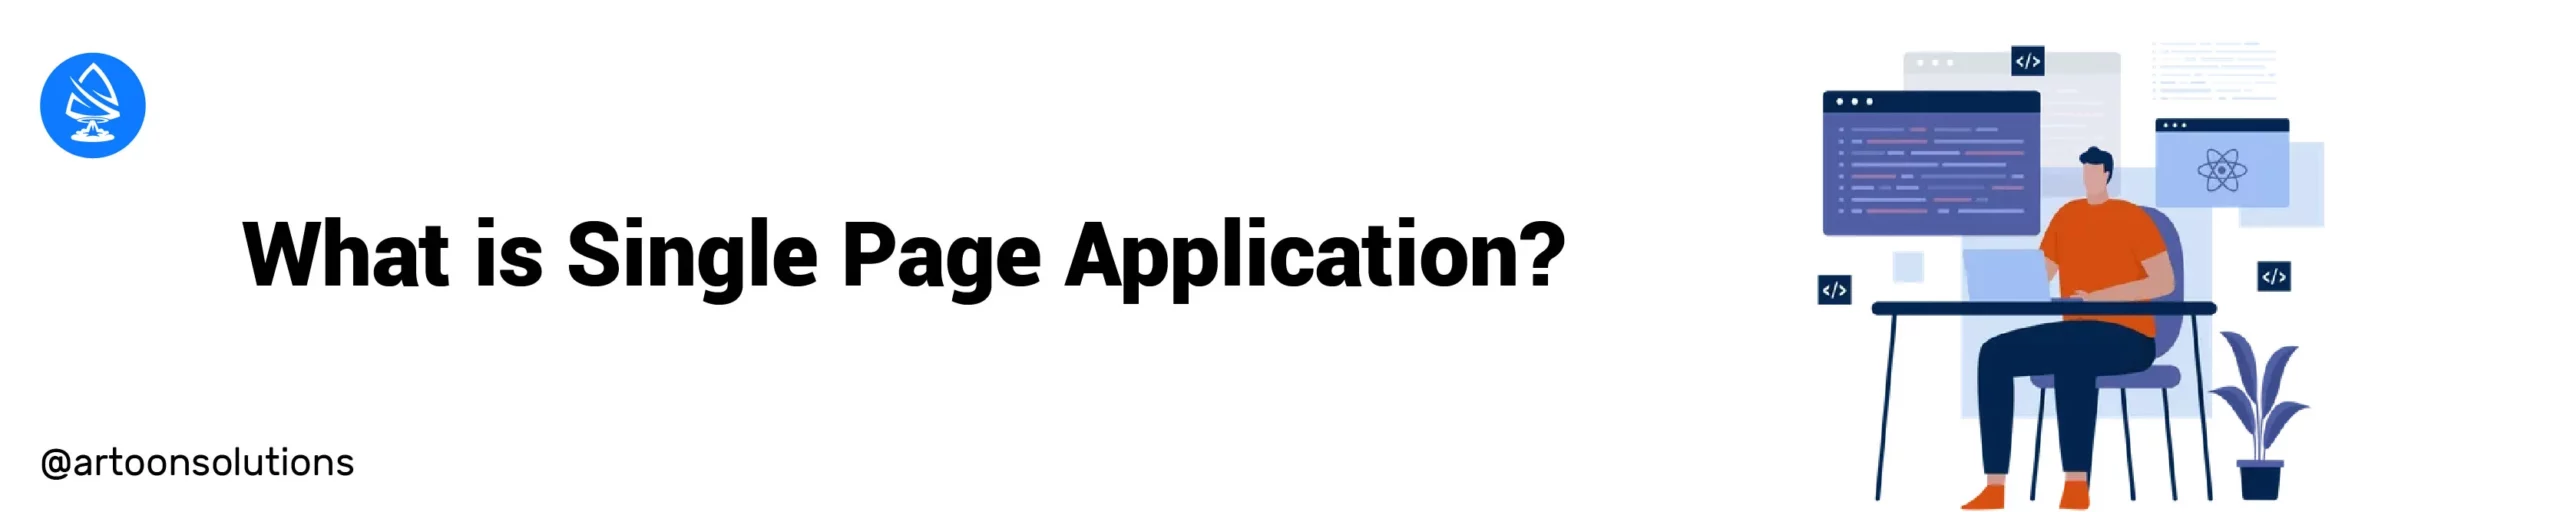 What is a Single Page Application?